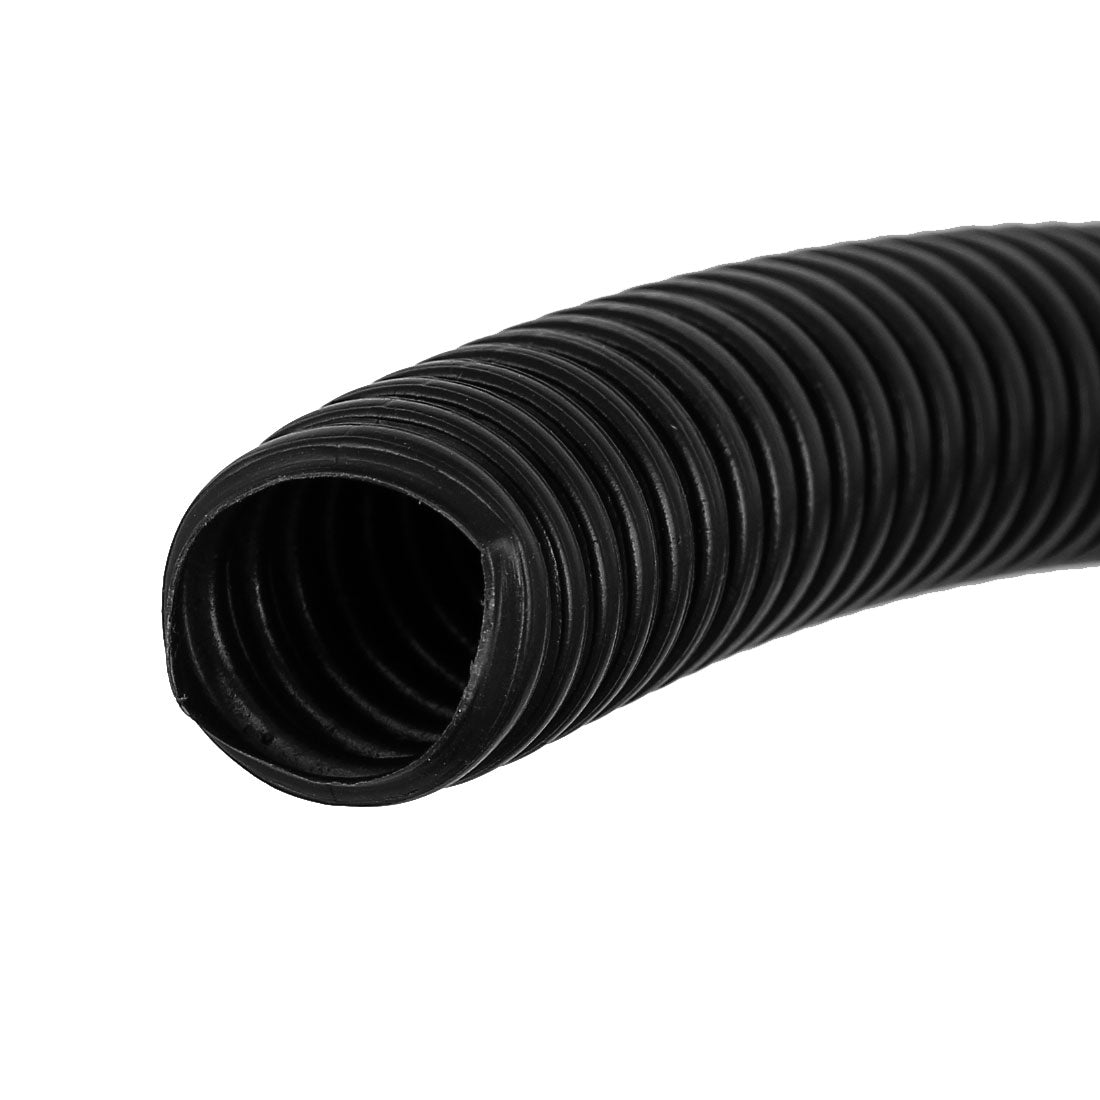 uxcell Uxcell 6 M 15 x 20 mm PVC Flexible Corrugated Conduit Tube for Garden,Office Black